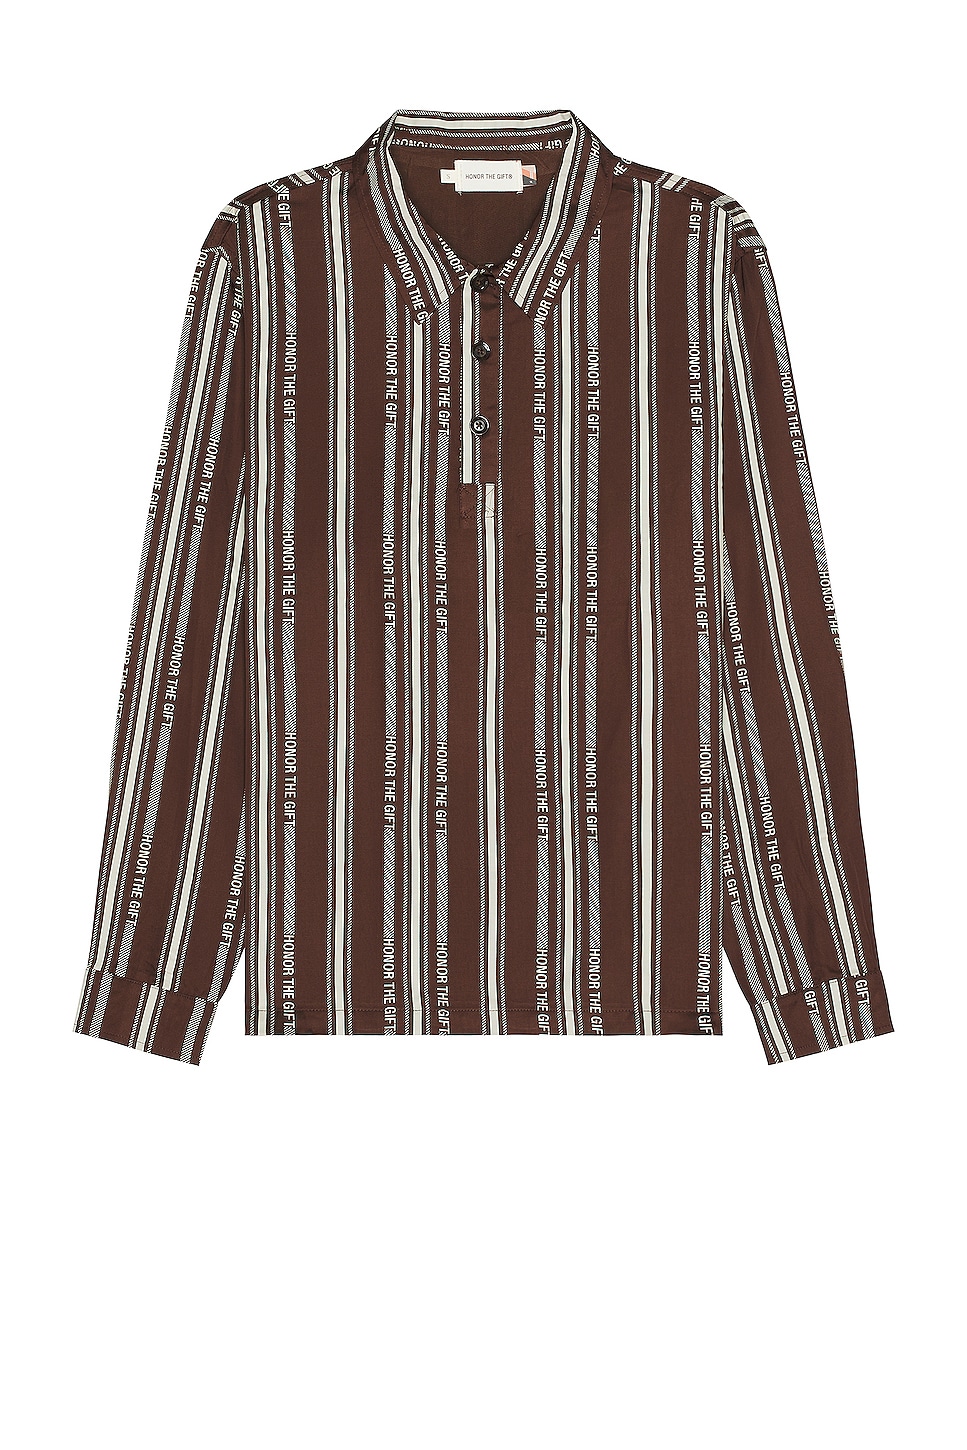 Image 1 of Honor The Gift Stripe Henley in Brown